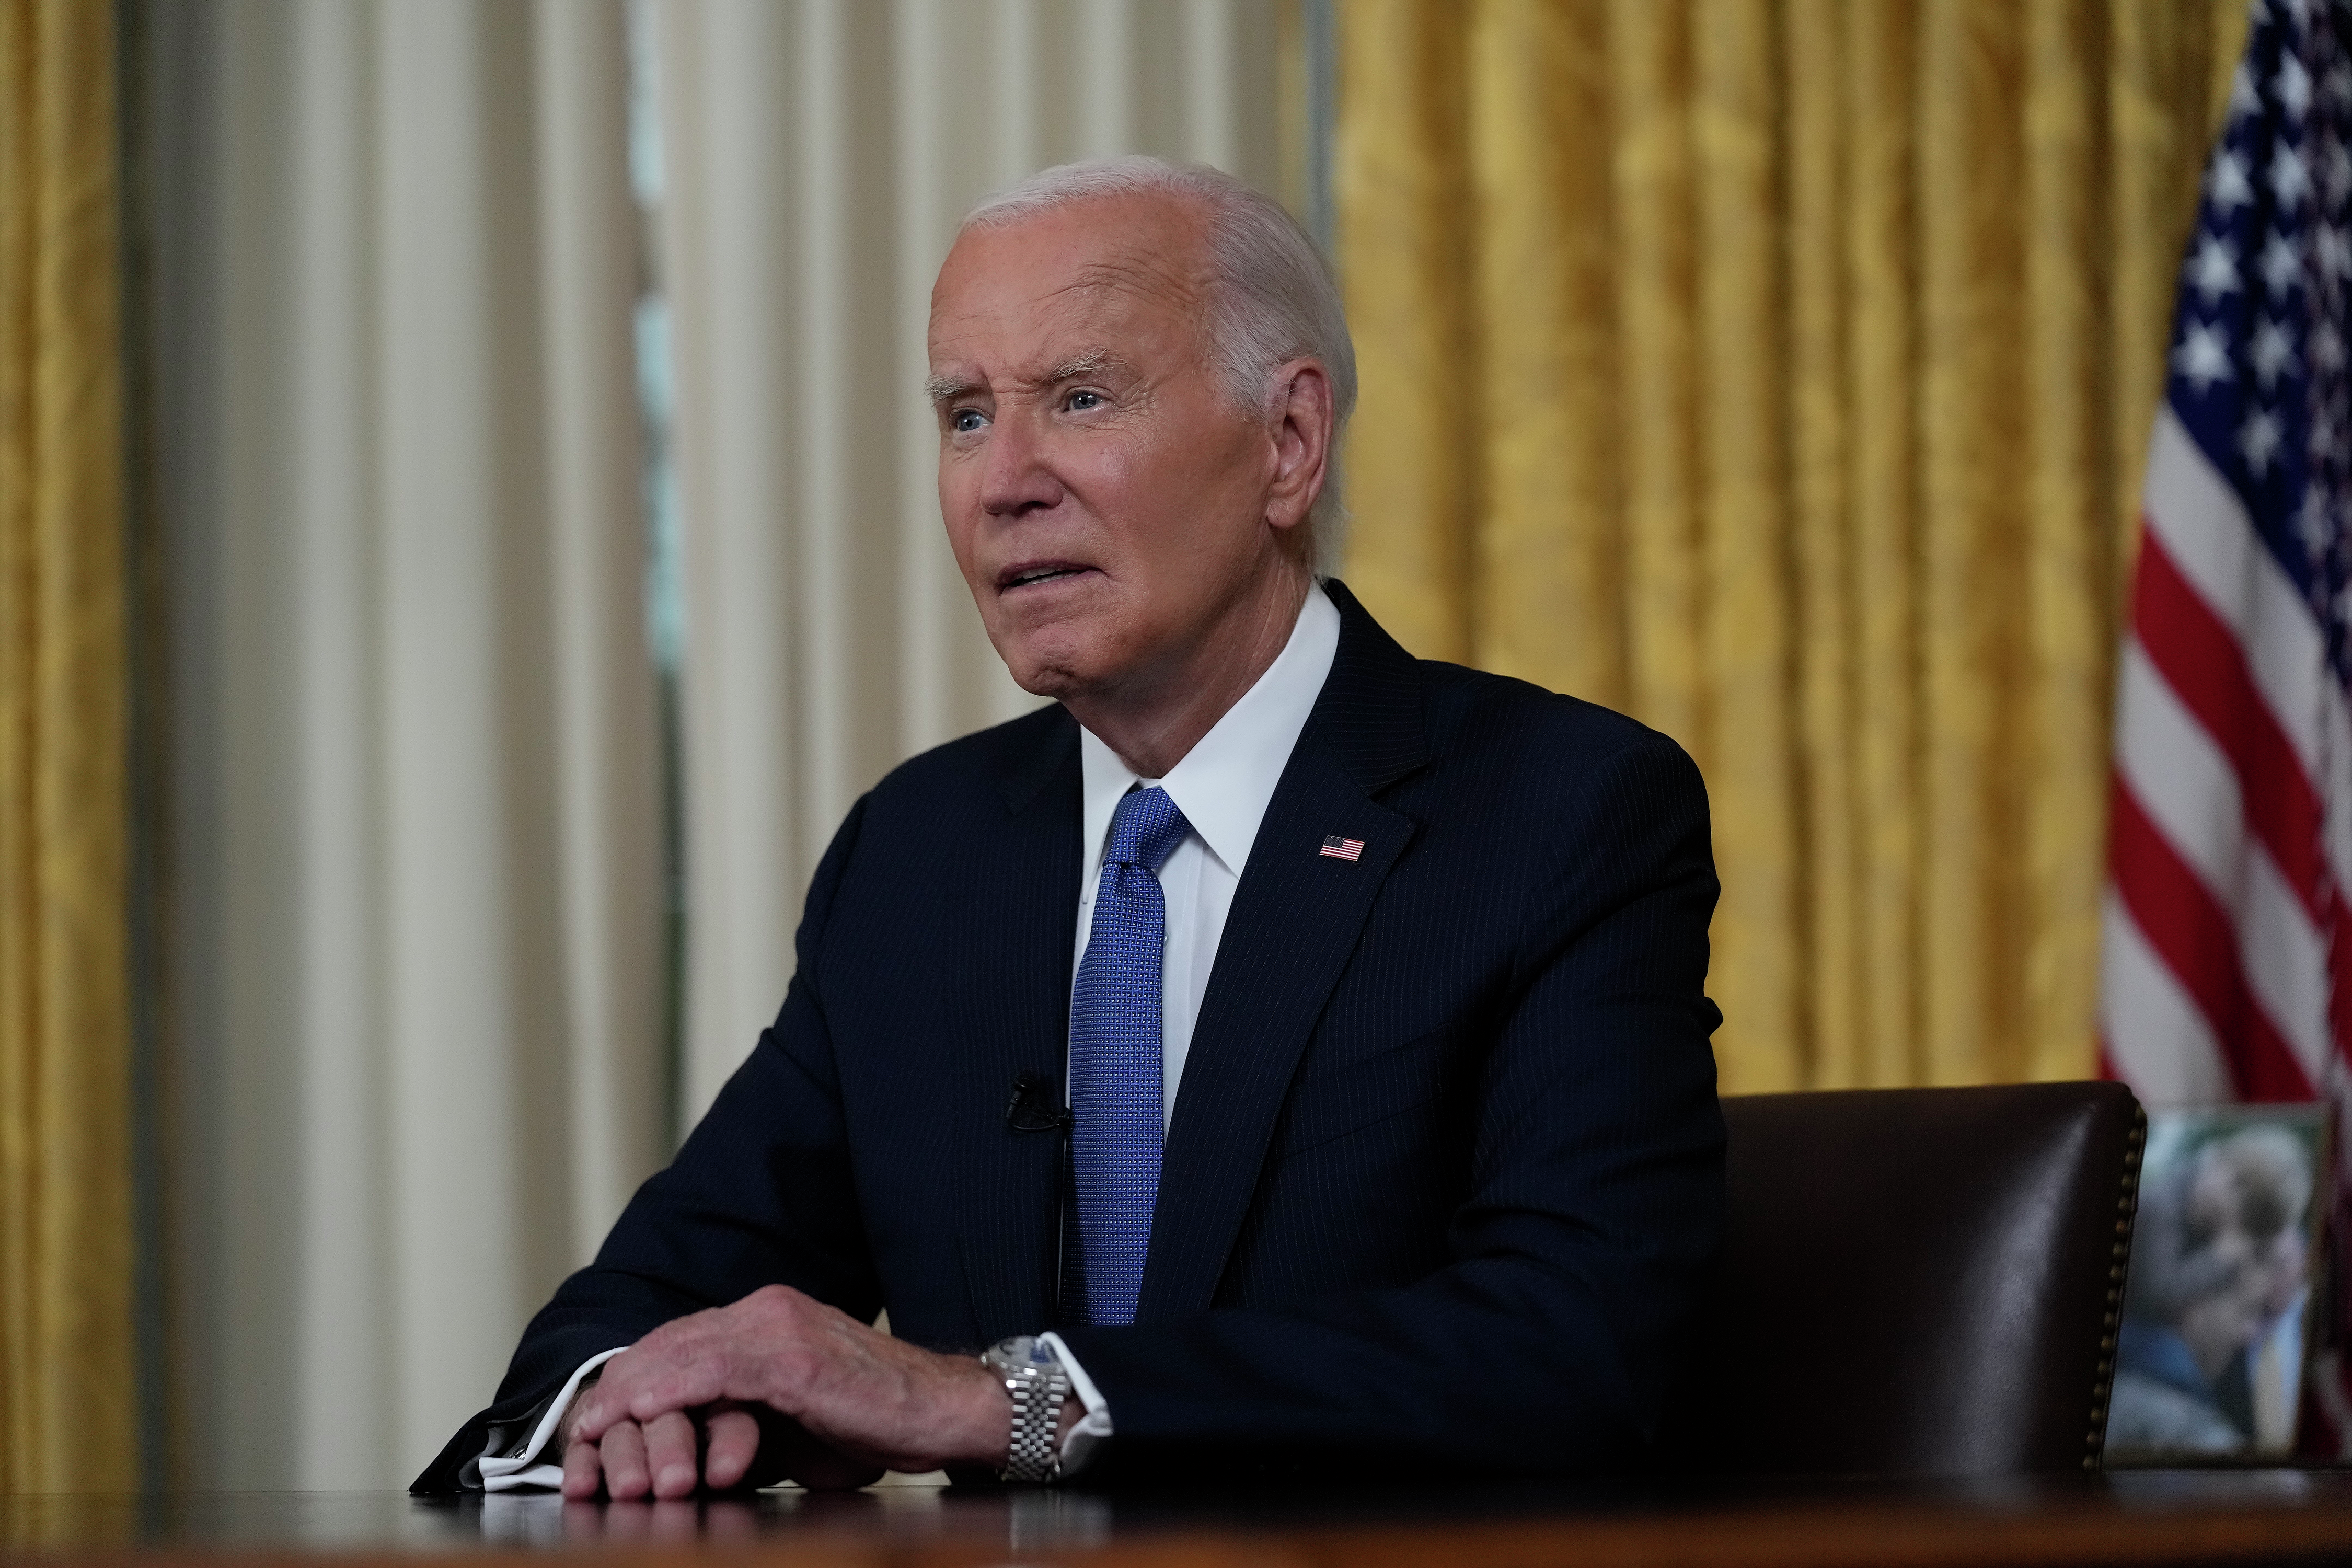 NEWSLINE: Biden calls for term limits, stronger ethics, and more for Supreme Court Justices